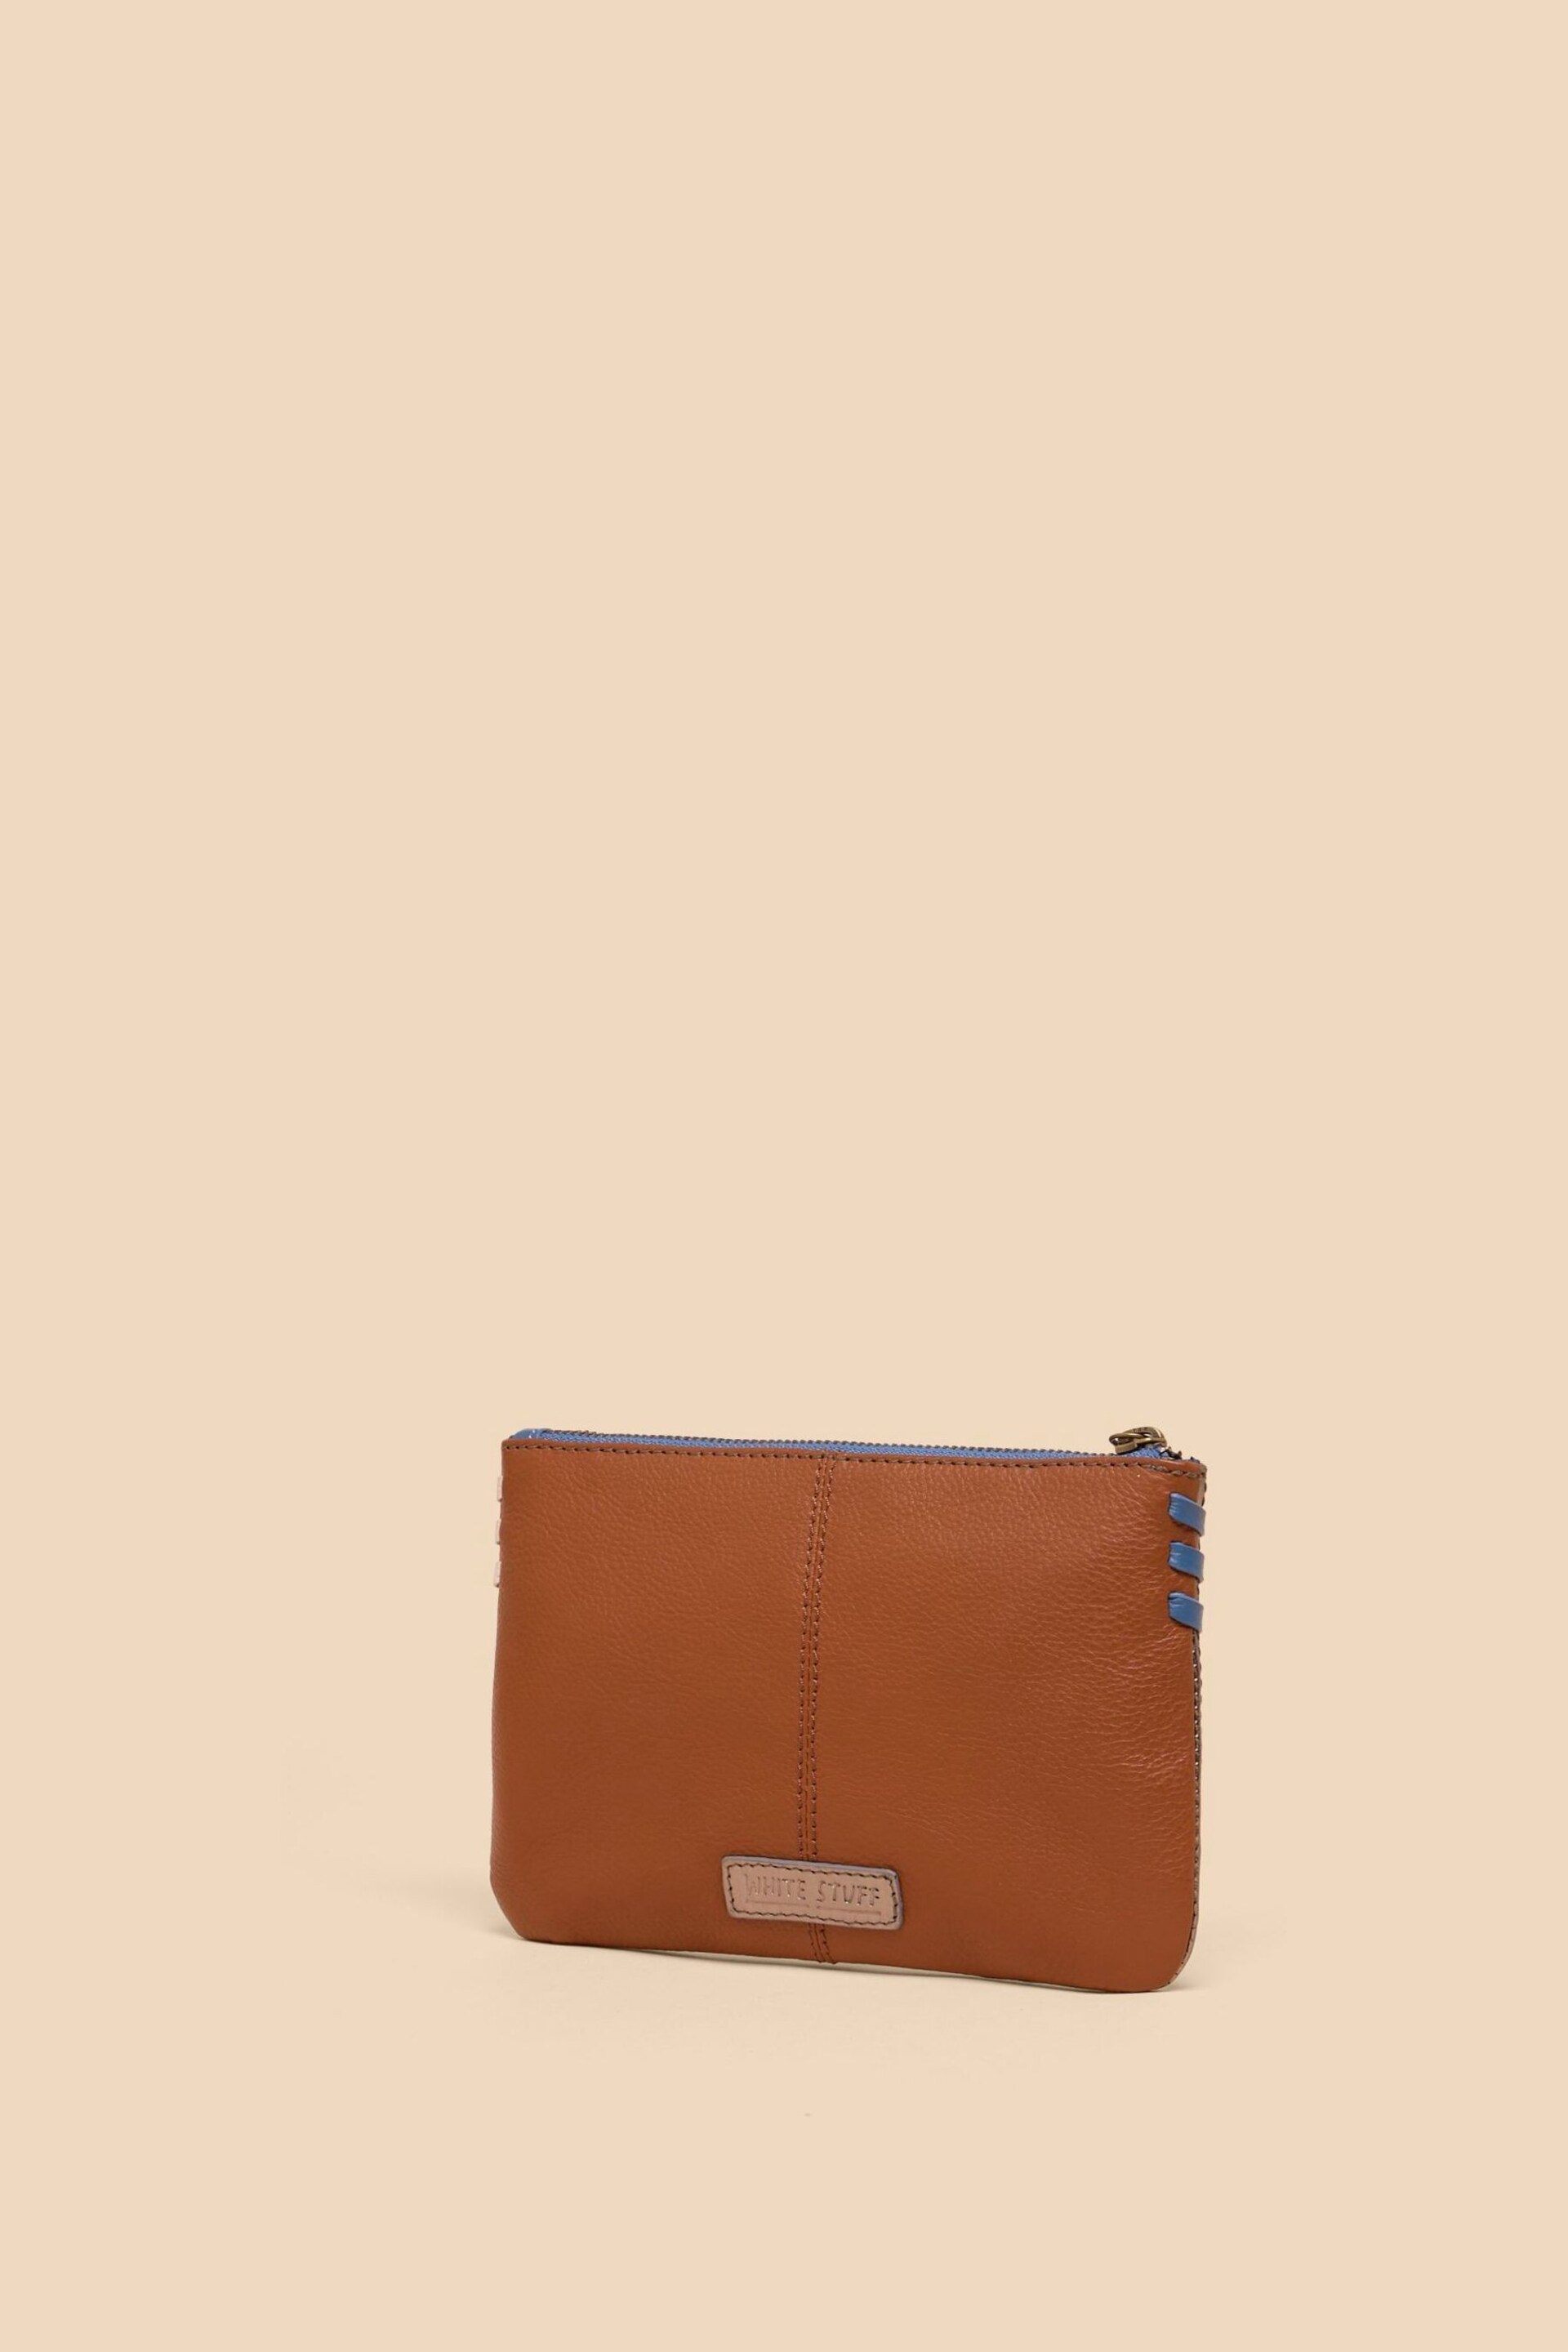 White Stuff Brown Leather Zip Top Pouch - Image 1 of 4